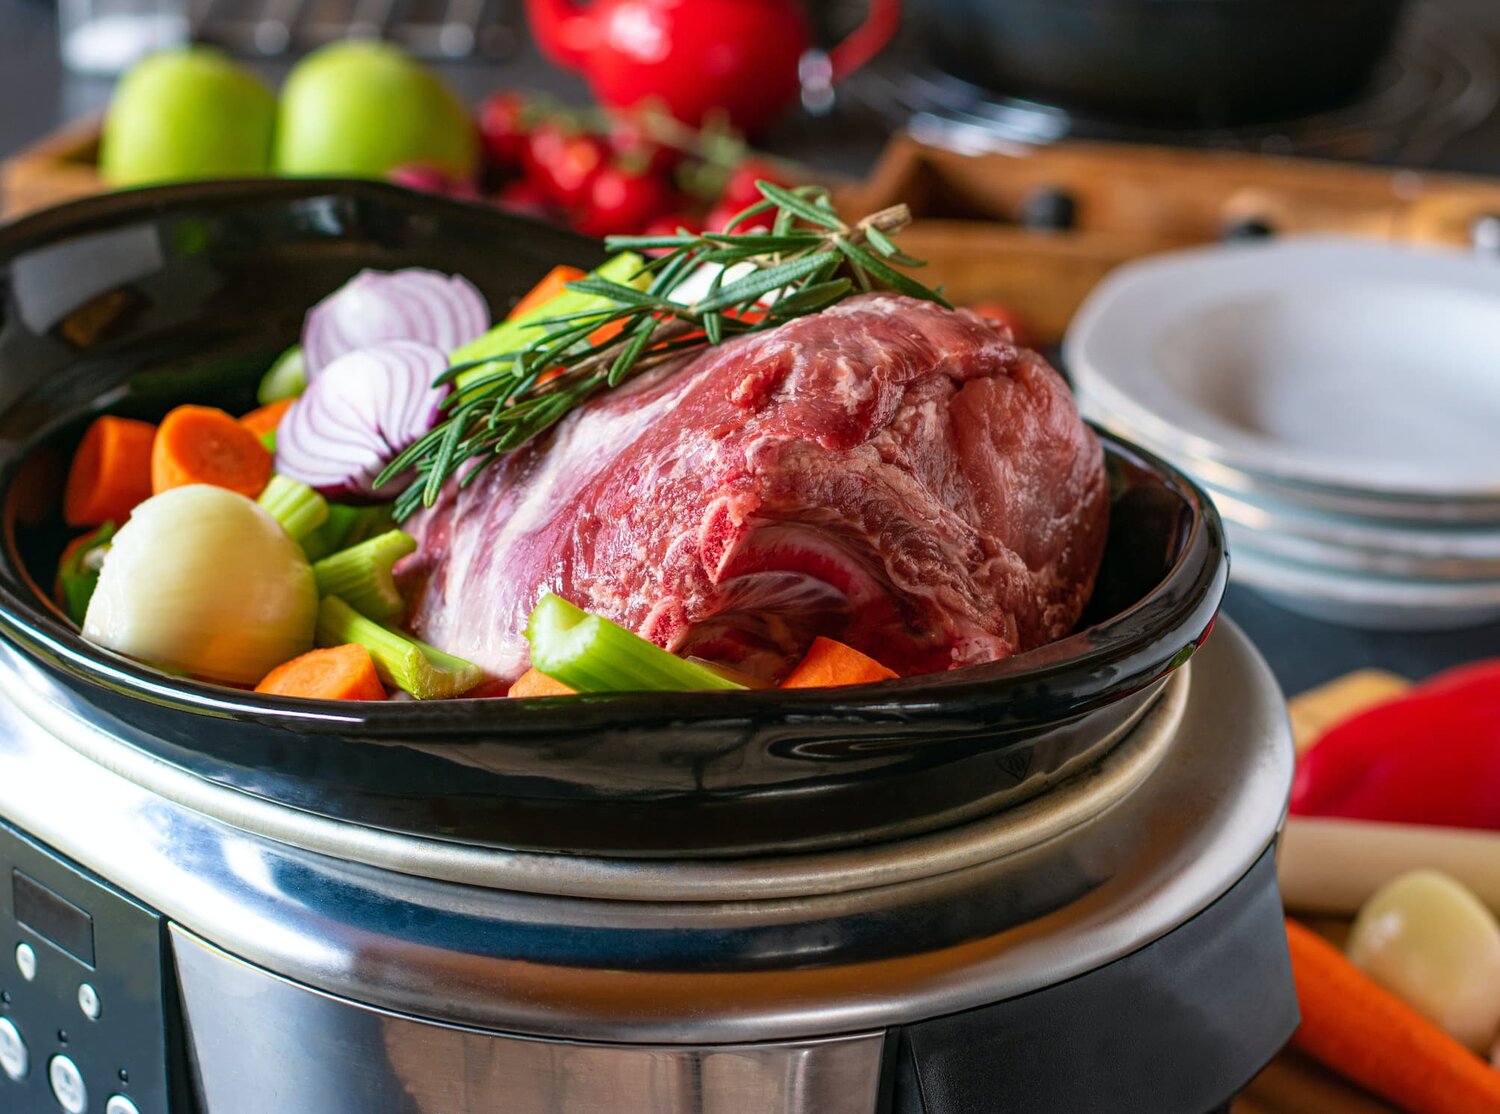 Slow Cooker Size Guide: Find the Right Fit for Your Kitchen